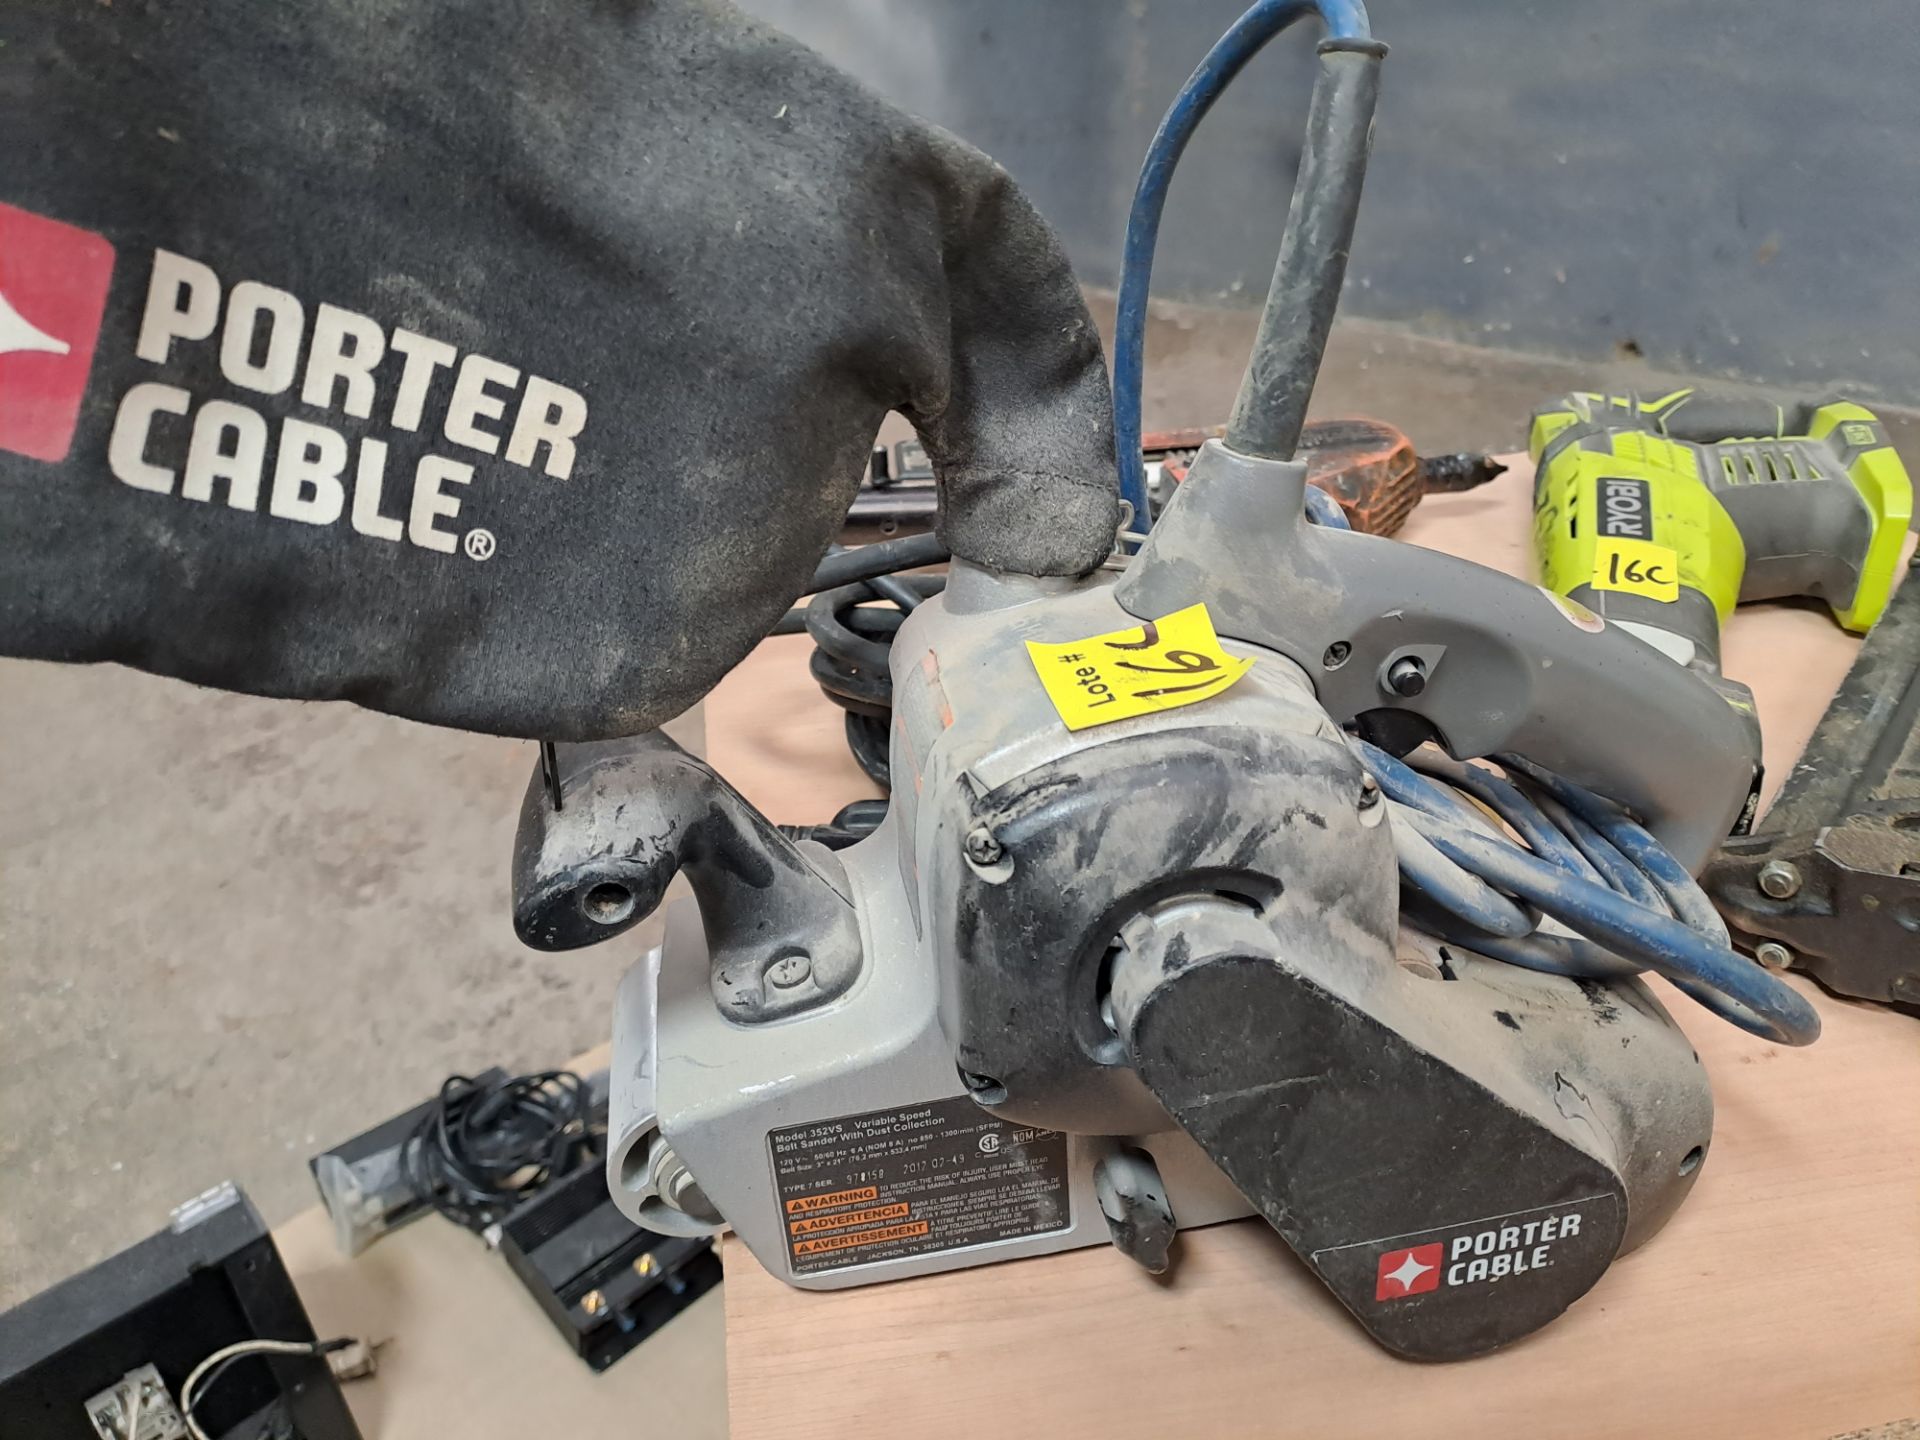 Lot of 4 pieces contains: 1 Porter electric sander with dust collector; 1 Ryobi wood saw without ba - Image 9 of 14